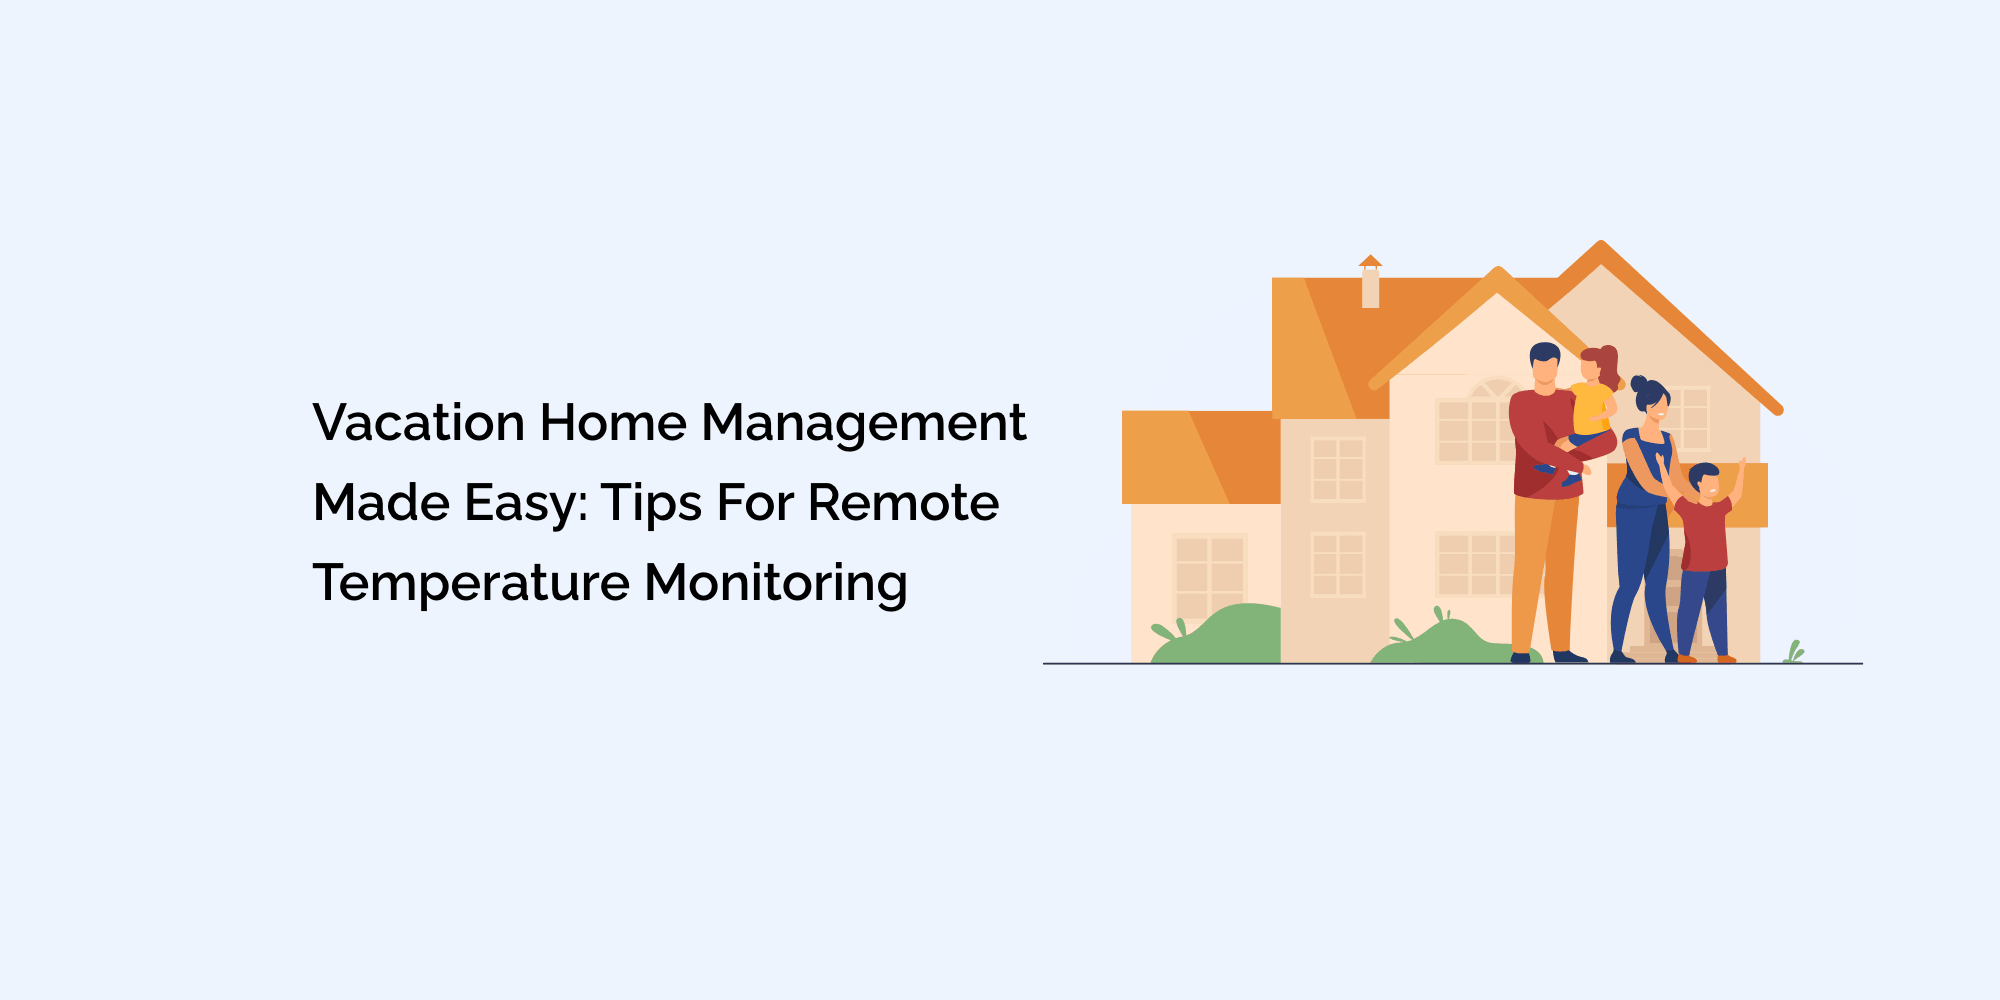 Vacation Home Management Made Easy: Tips for Remote Temperature Monitoring